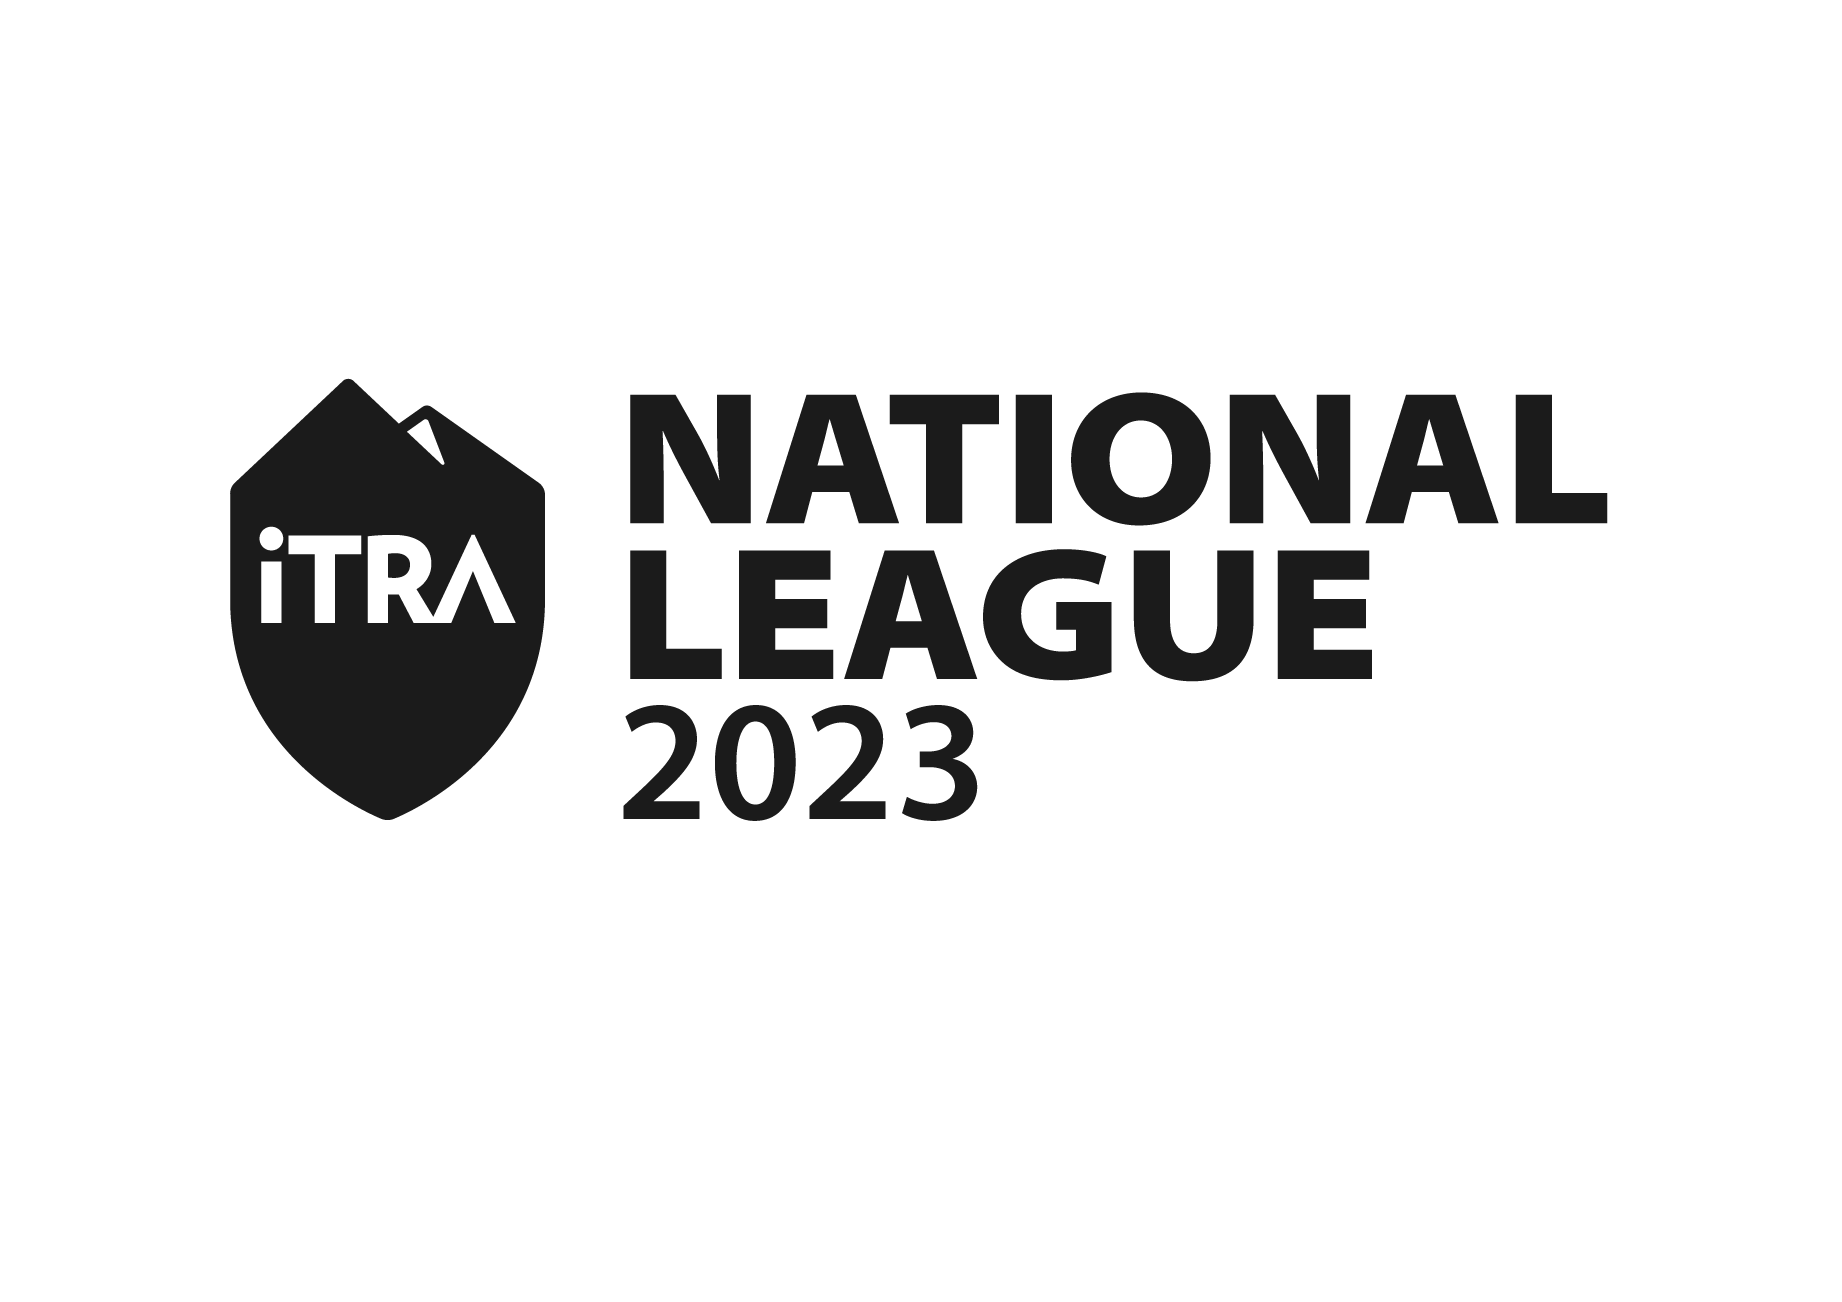 ITRA National League